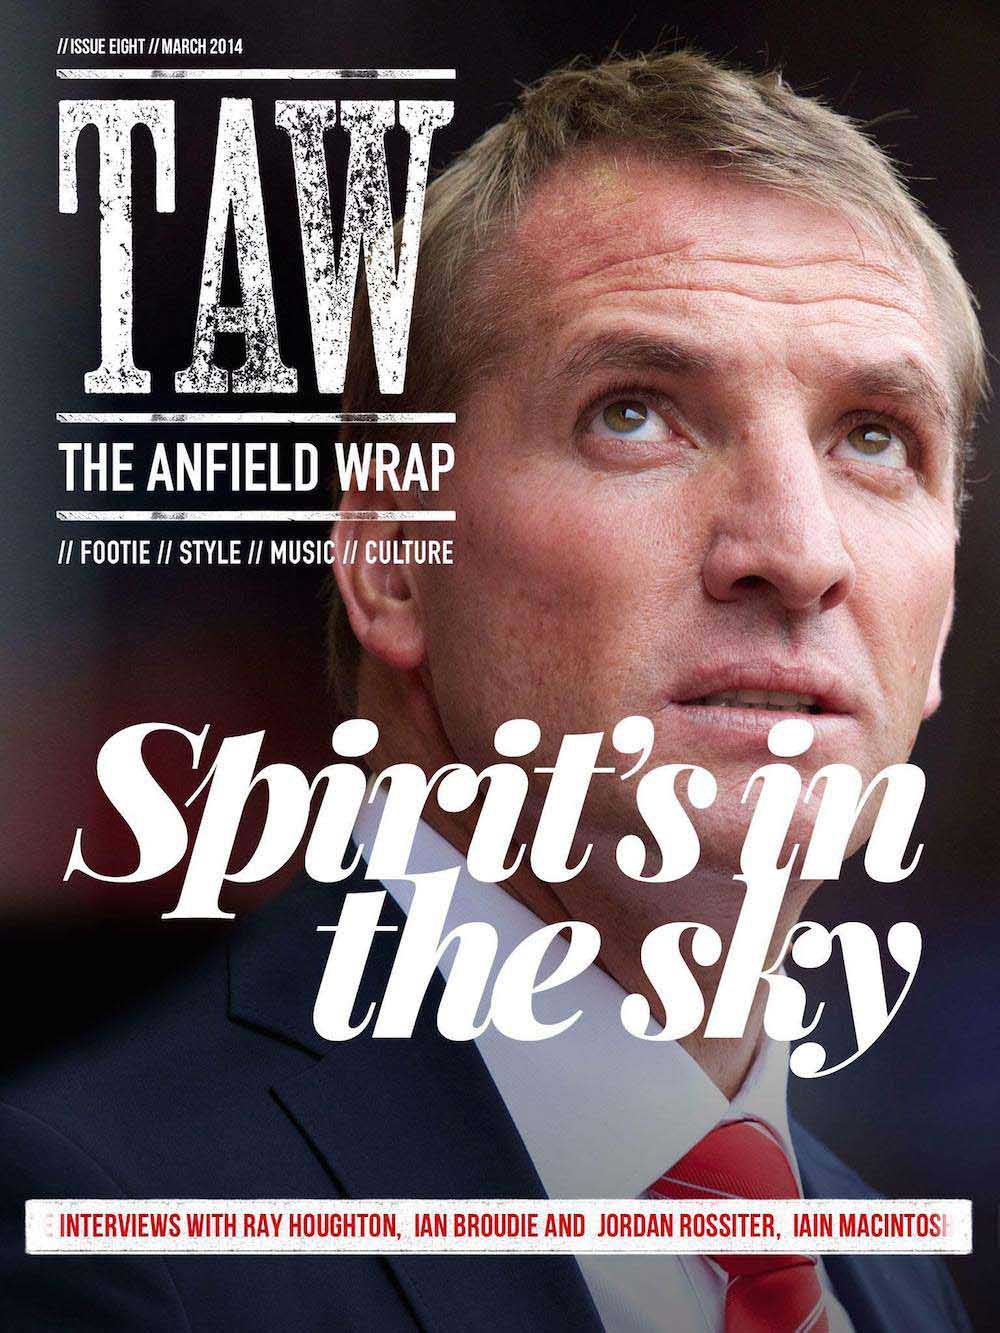 THE ANFIELD WRAP MAGAZINE #8: SPIRIT’S IN THE SKY